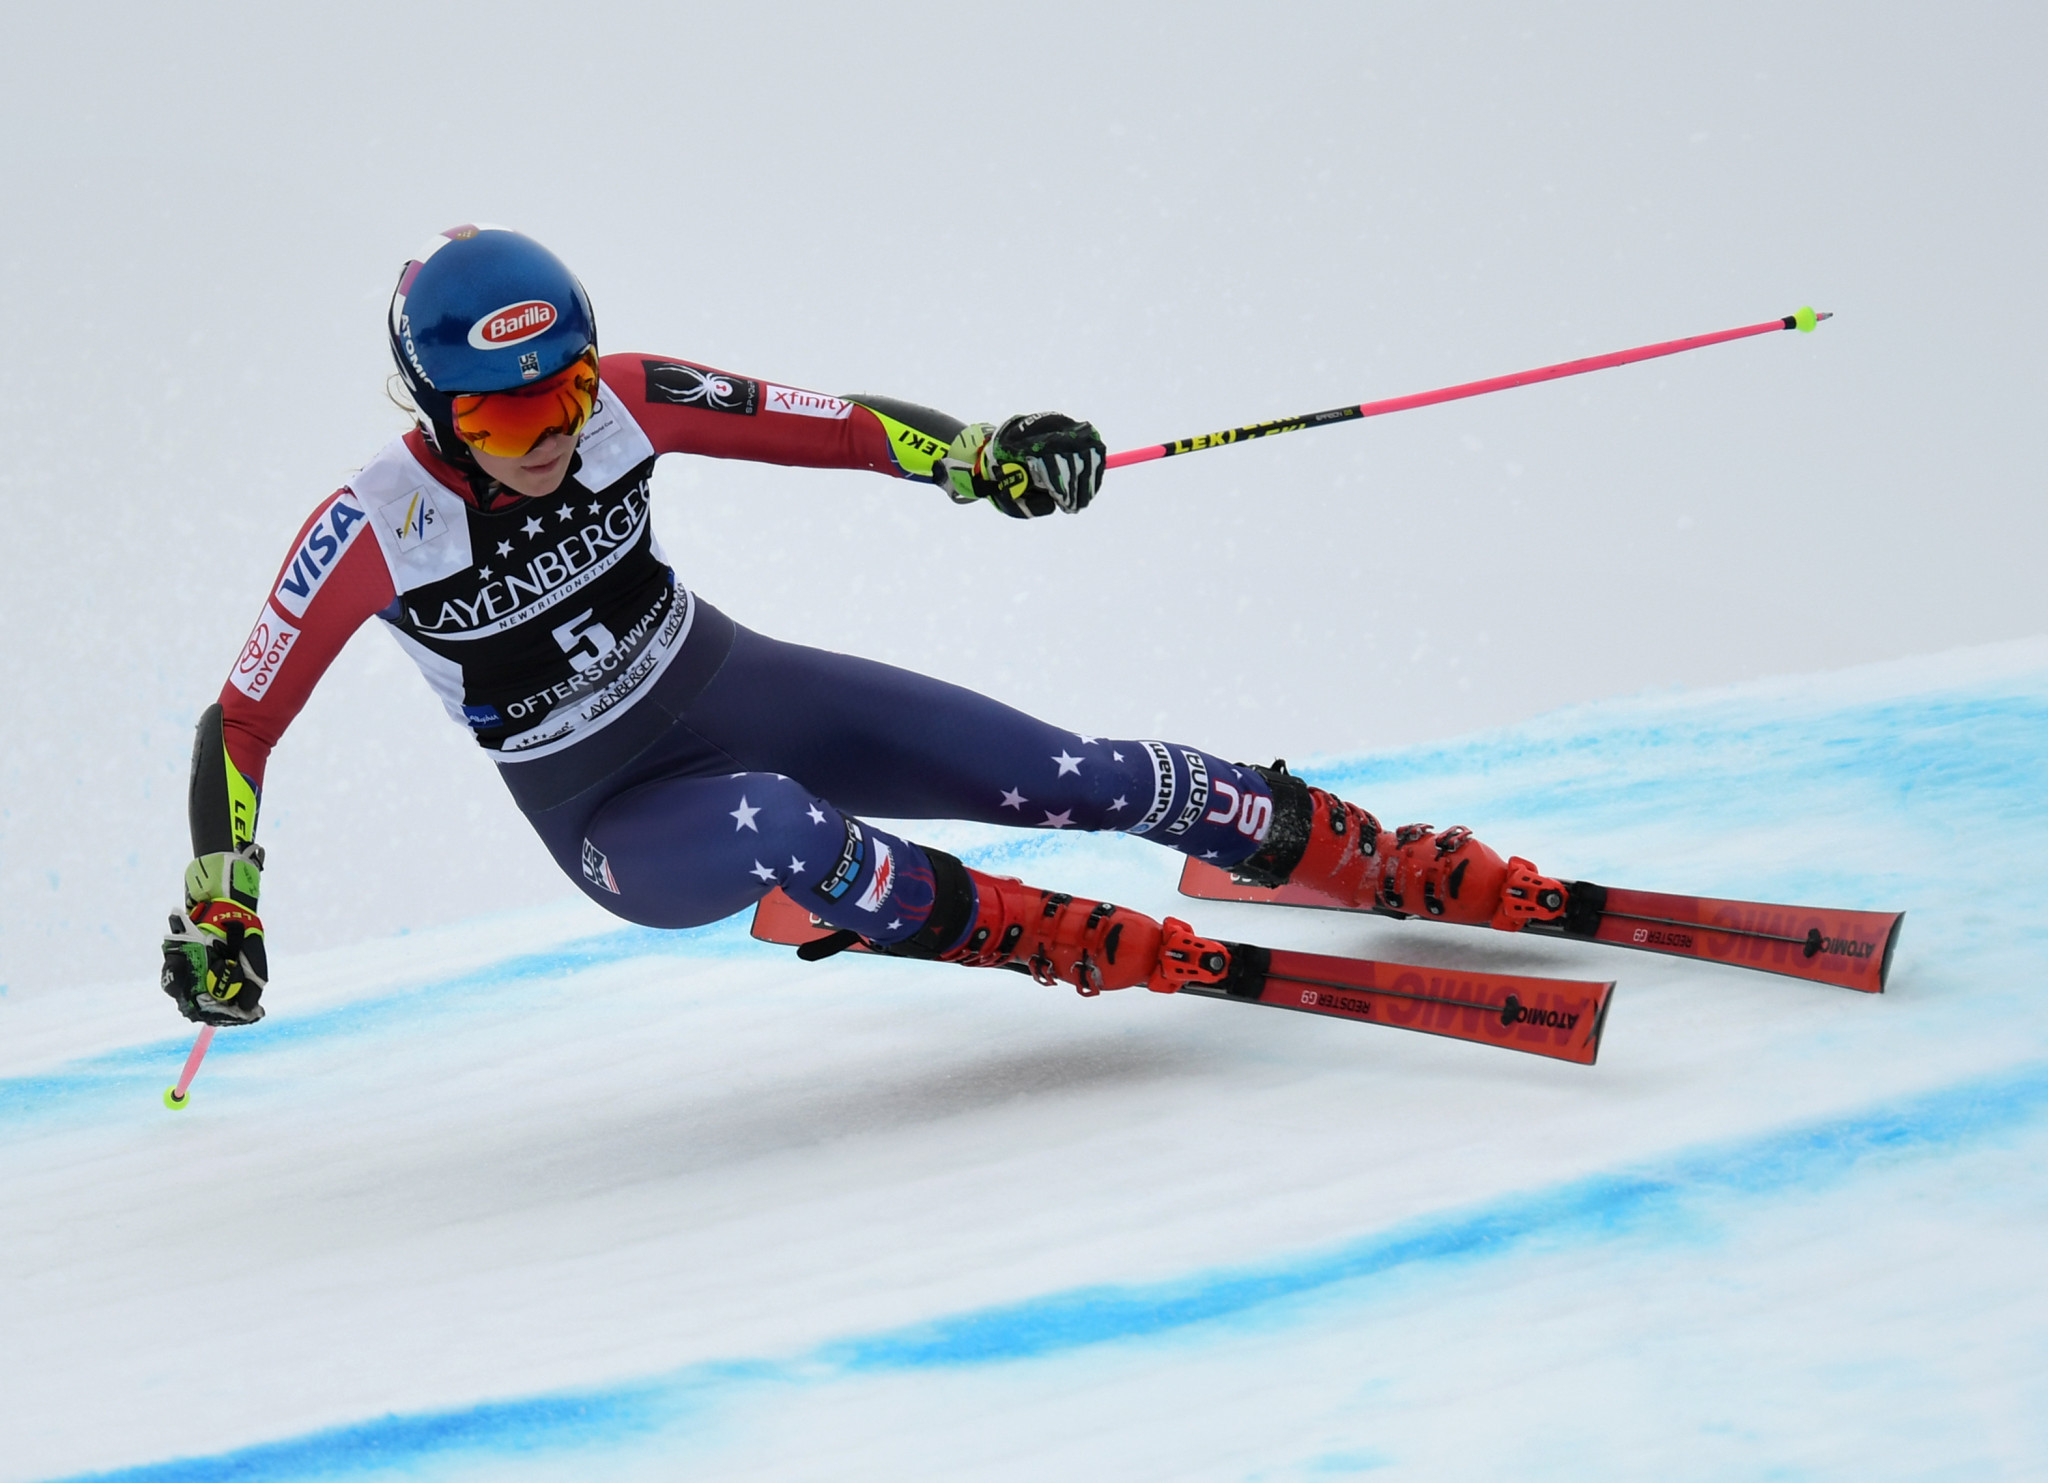 Mikaela Shiffrin captured the overall World Cup title today ©Getty Images